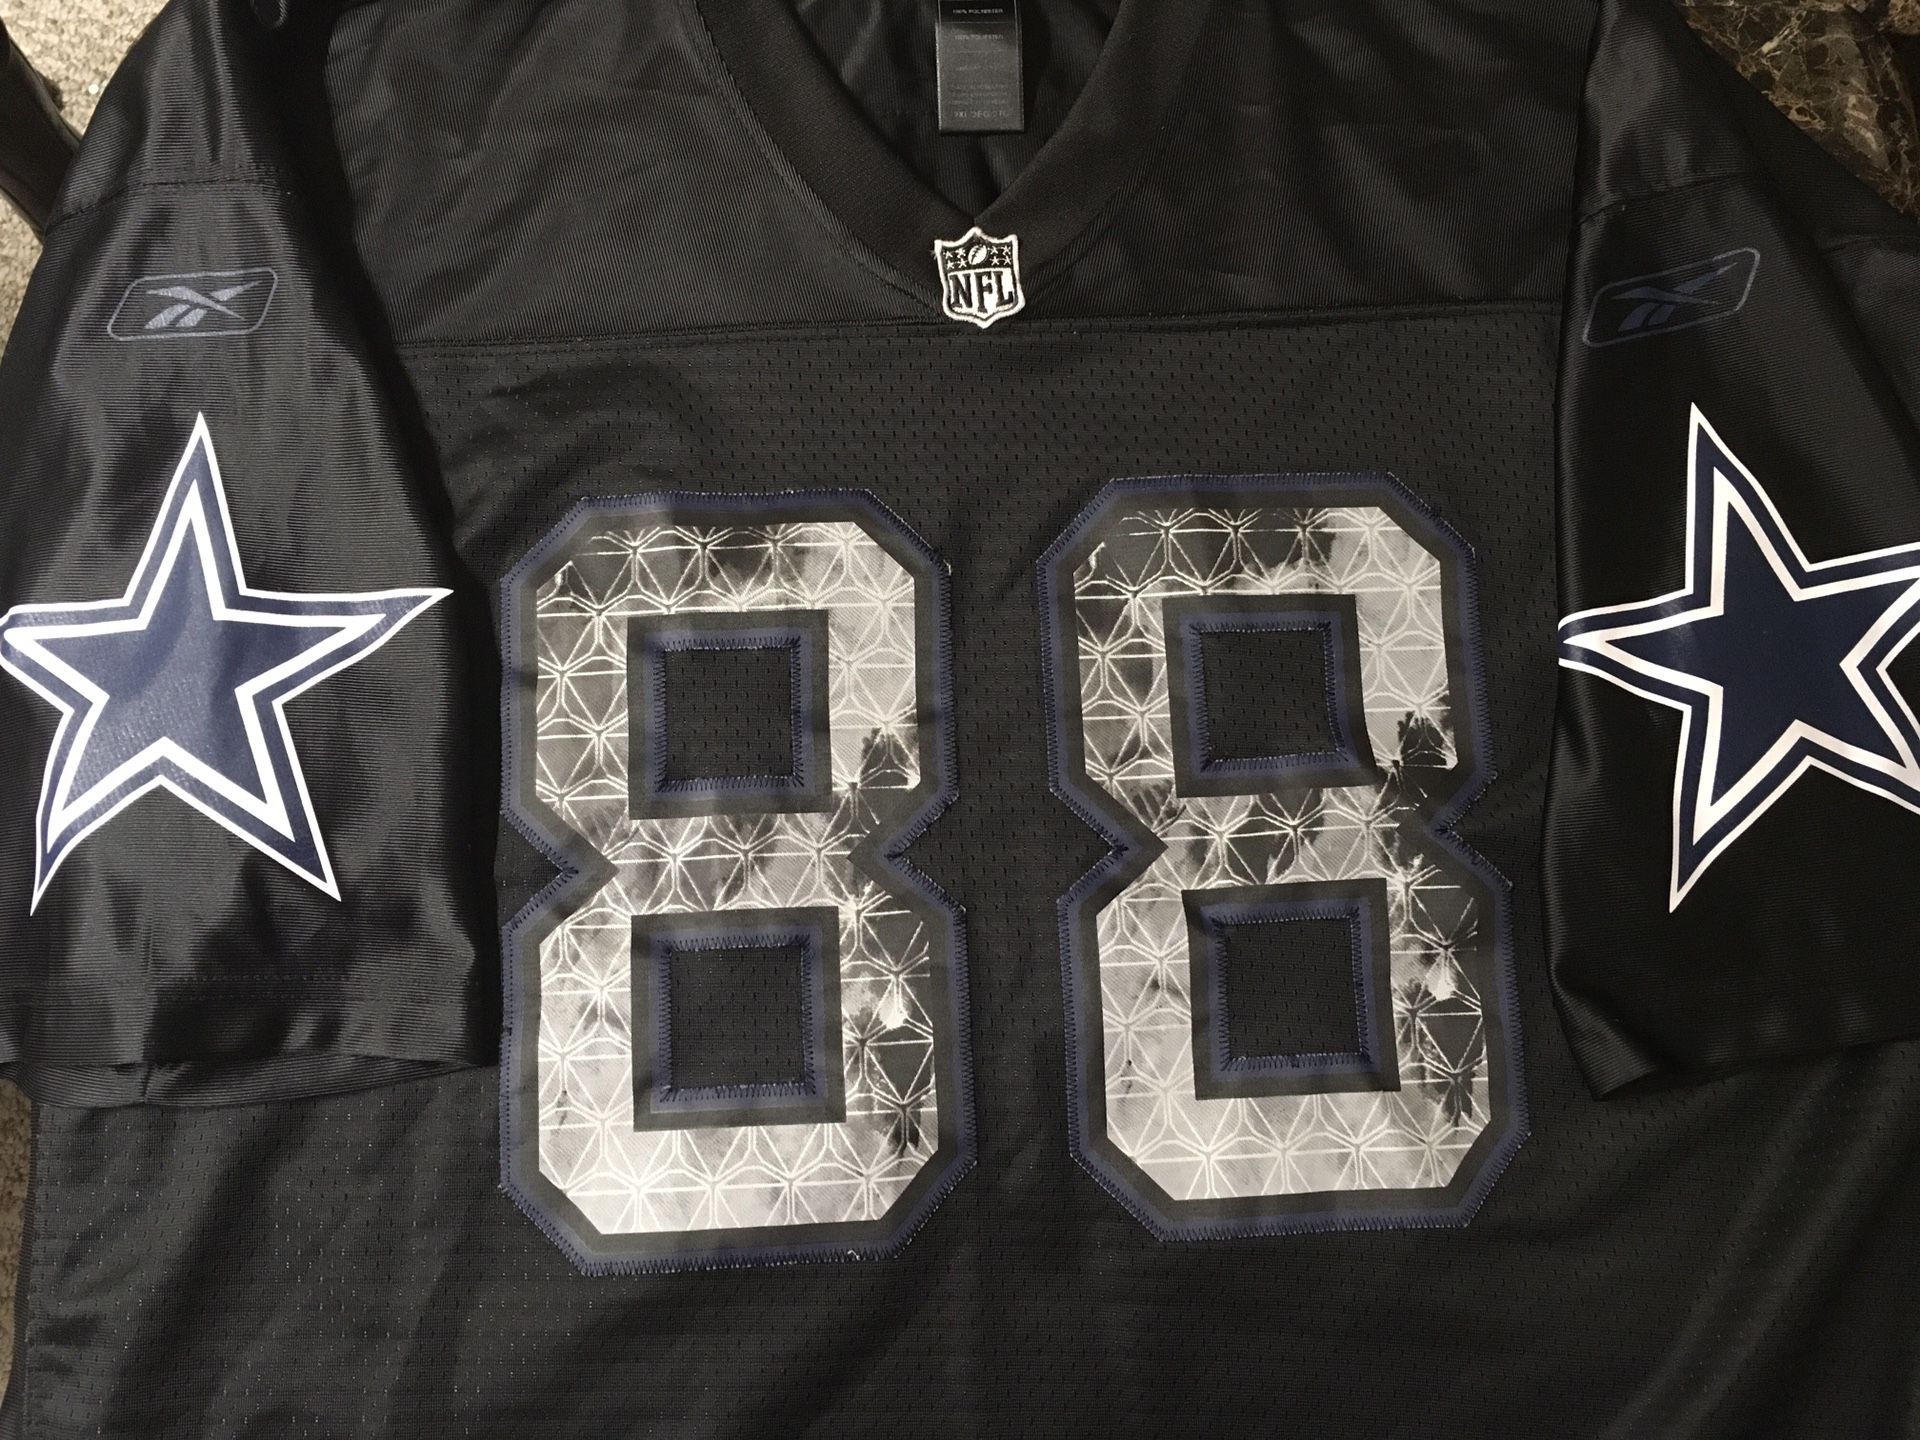 Reebok NFL Dez Bryant 88 Black United Premier Jersey Dallas Cowboys. Condition is "pre-owned". No rips, tears, stains. Sewn on numbers. Please see ph